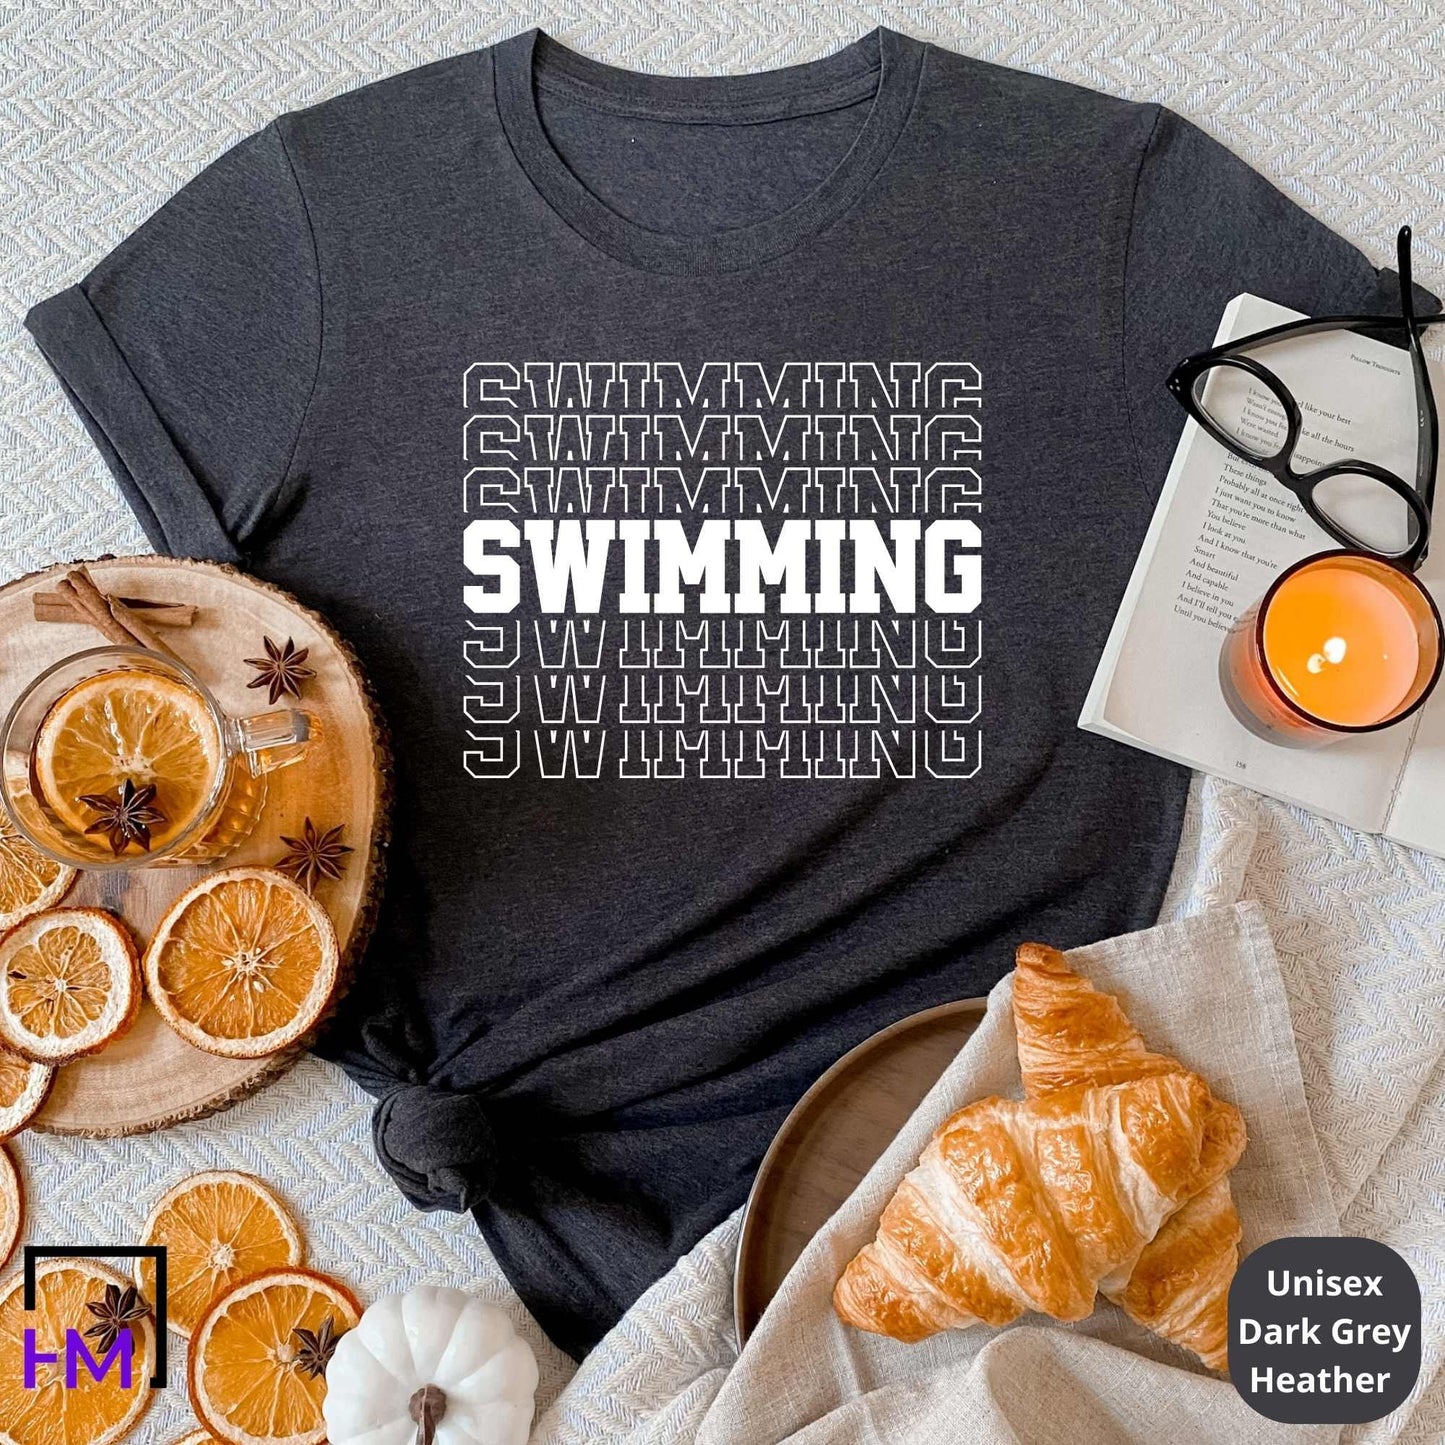 Swim in Style: Unique Swimming Themed T-Shirts for True Water Enthusiasts